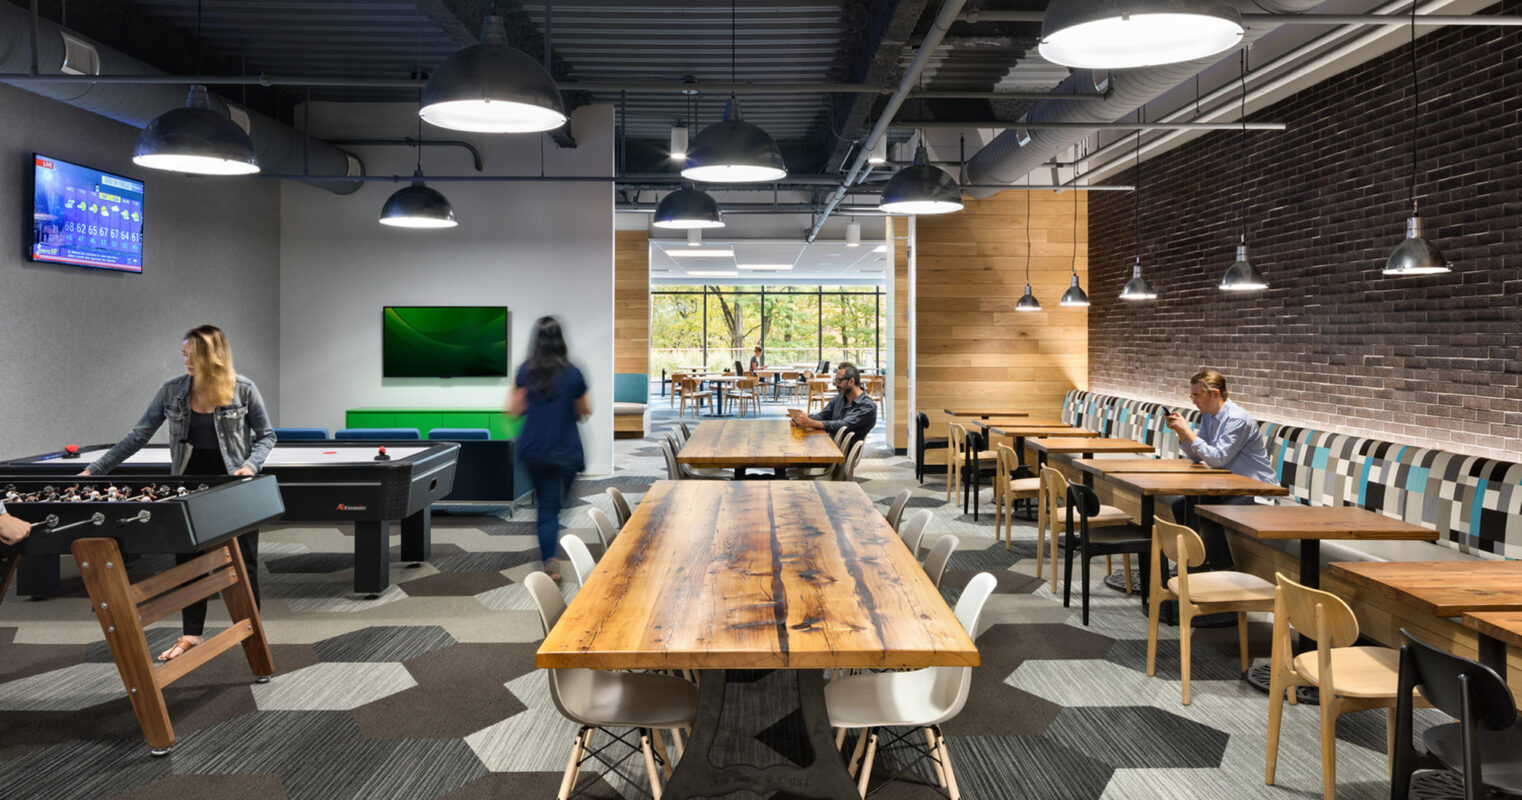 Modern office break room featuring a rustic wooden communal table, individual tables with chairs, pendant lighting, a foosball table, and a relaxed, collaborative atmosphere. An exposed ceiling and large windows create an airy, well-lit space.